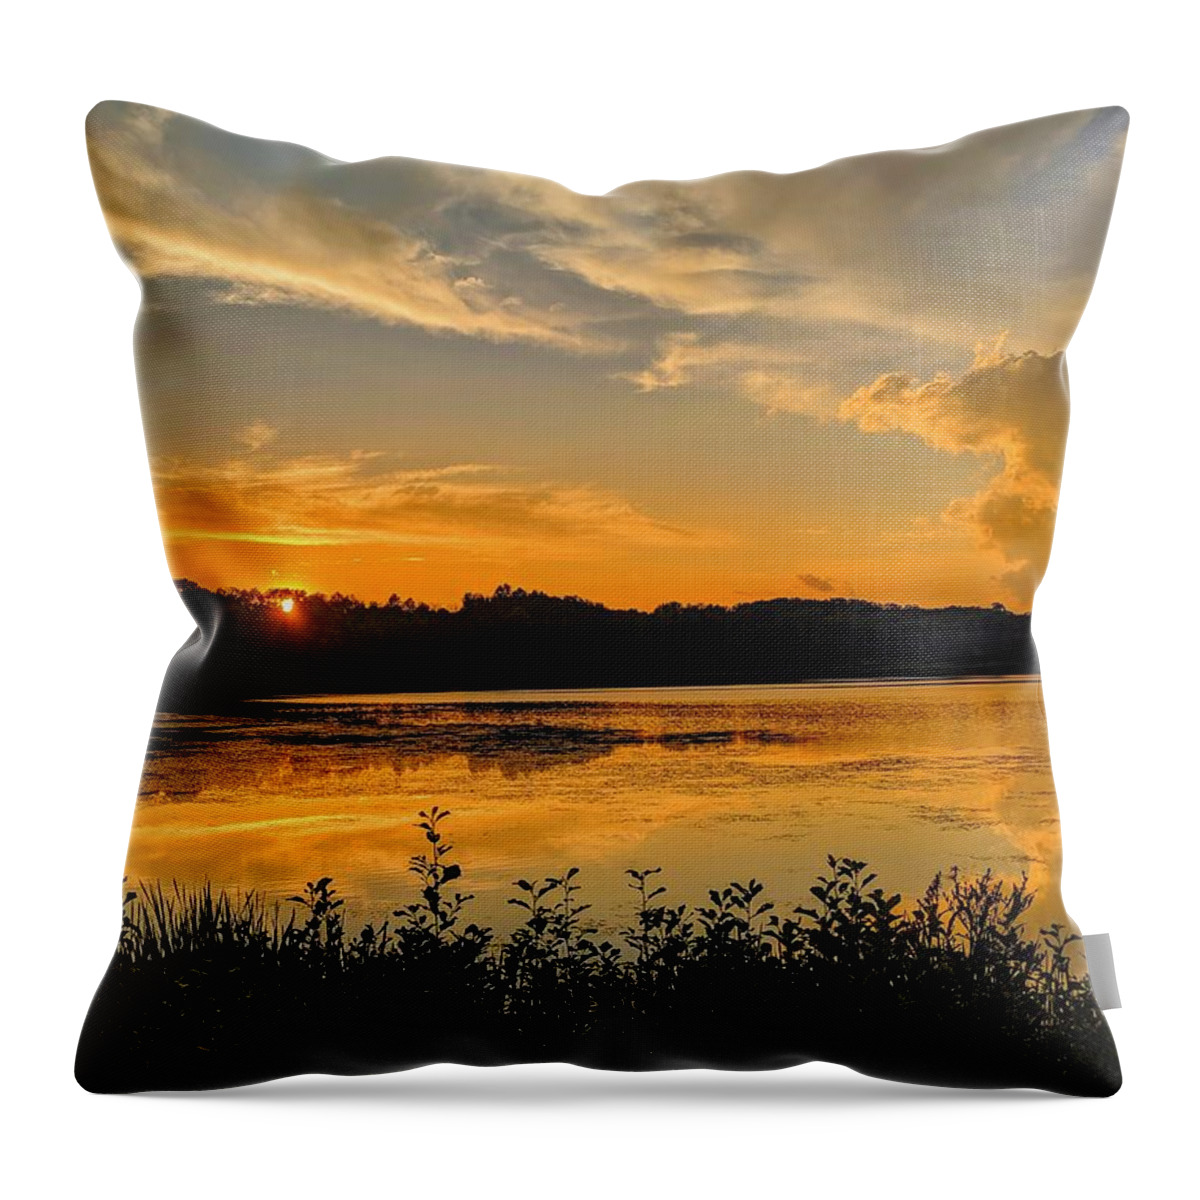  Throw Pillow featuring the photograph Sunny Lake Park Sunset by Brad Nellis